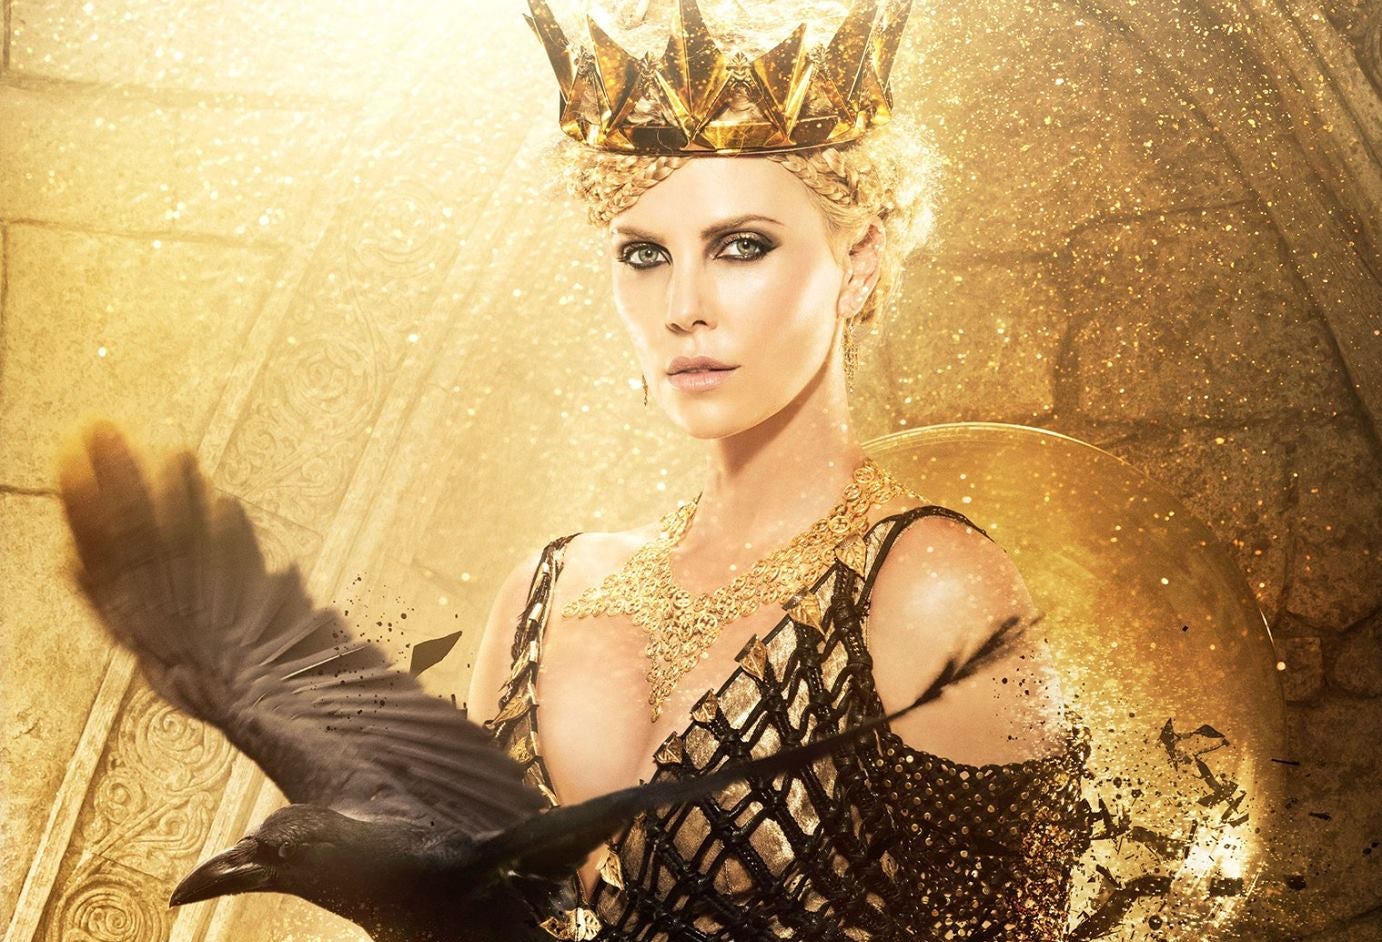 Charlize Theron as The Evil Queen in The Huntsman: Winter's War